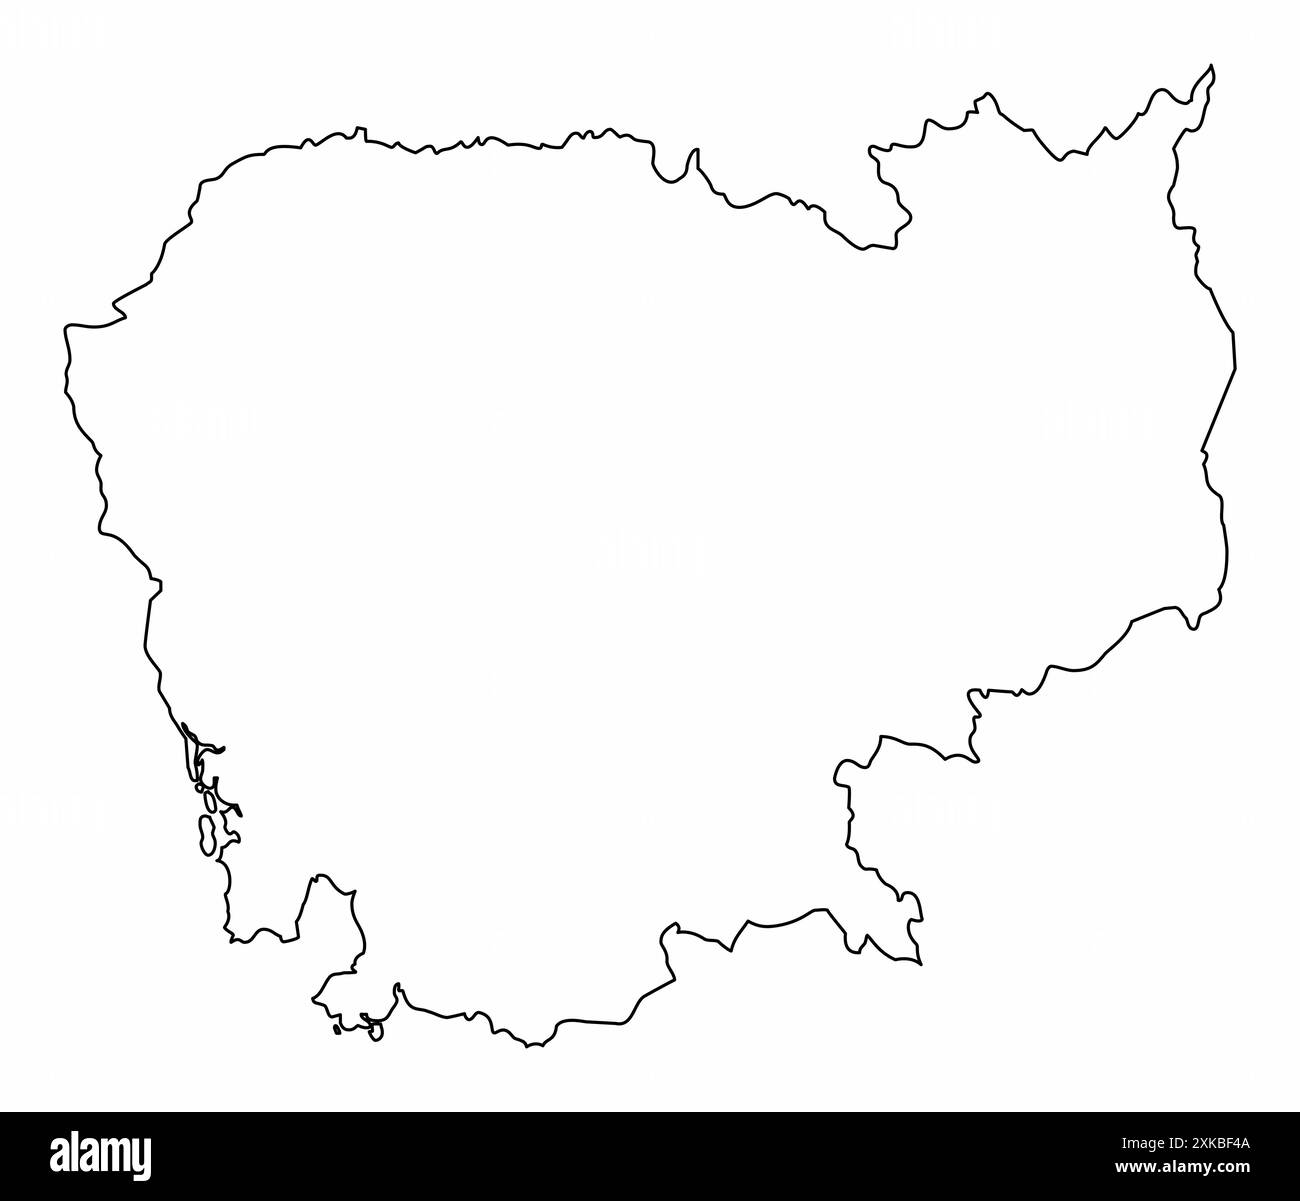 Cambodia outline map isolated on white background Stock Vector